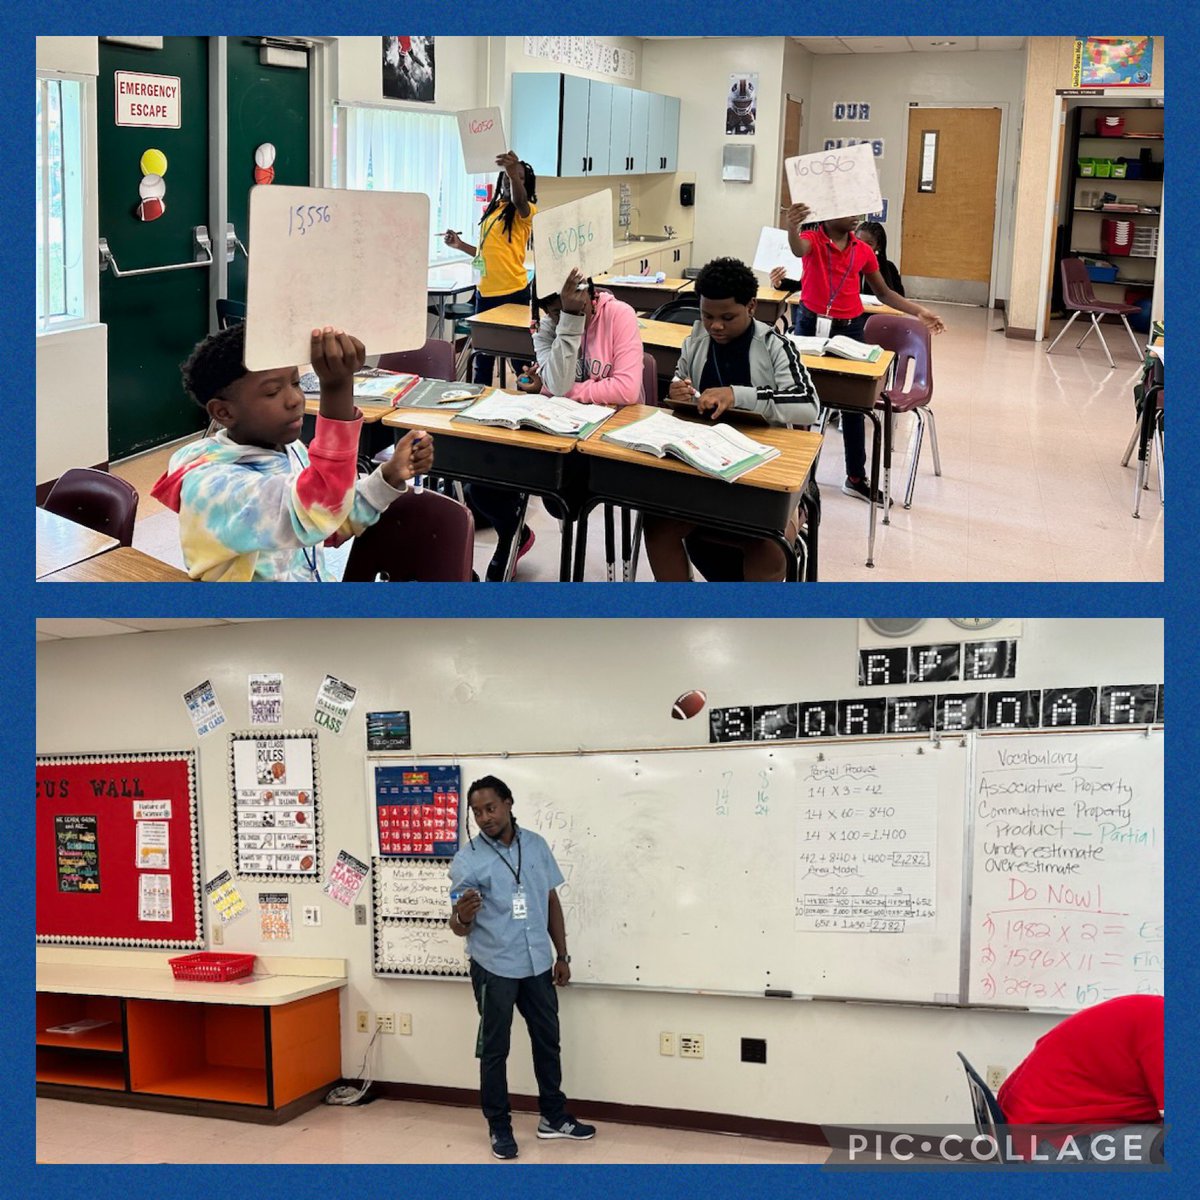 Teacher Spotlight 🗣️ Mr. Candy is a 2nd year instructional leader teaching 5th Grade Math & Science. Caught him in action this week using TLAC strategies, Show Me and followed up with Checking for Understanding. Great things are happening here. @RPE_AP @rumble_marie @BcpsCentral_